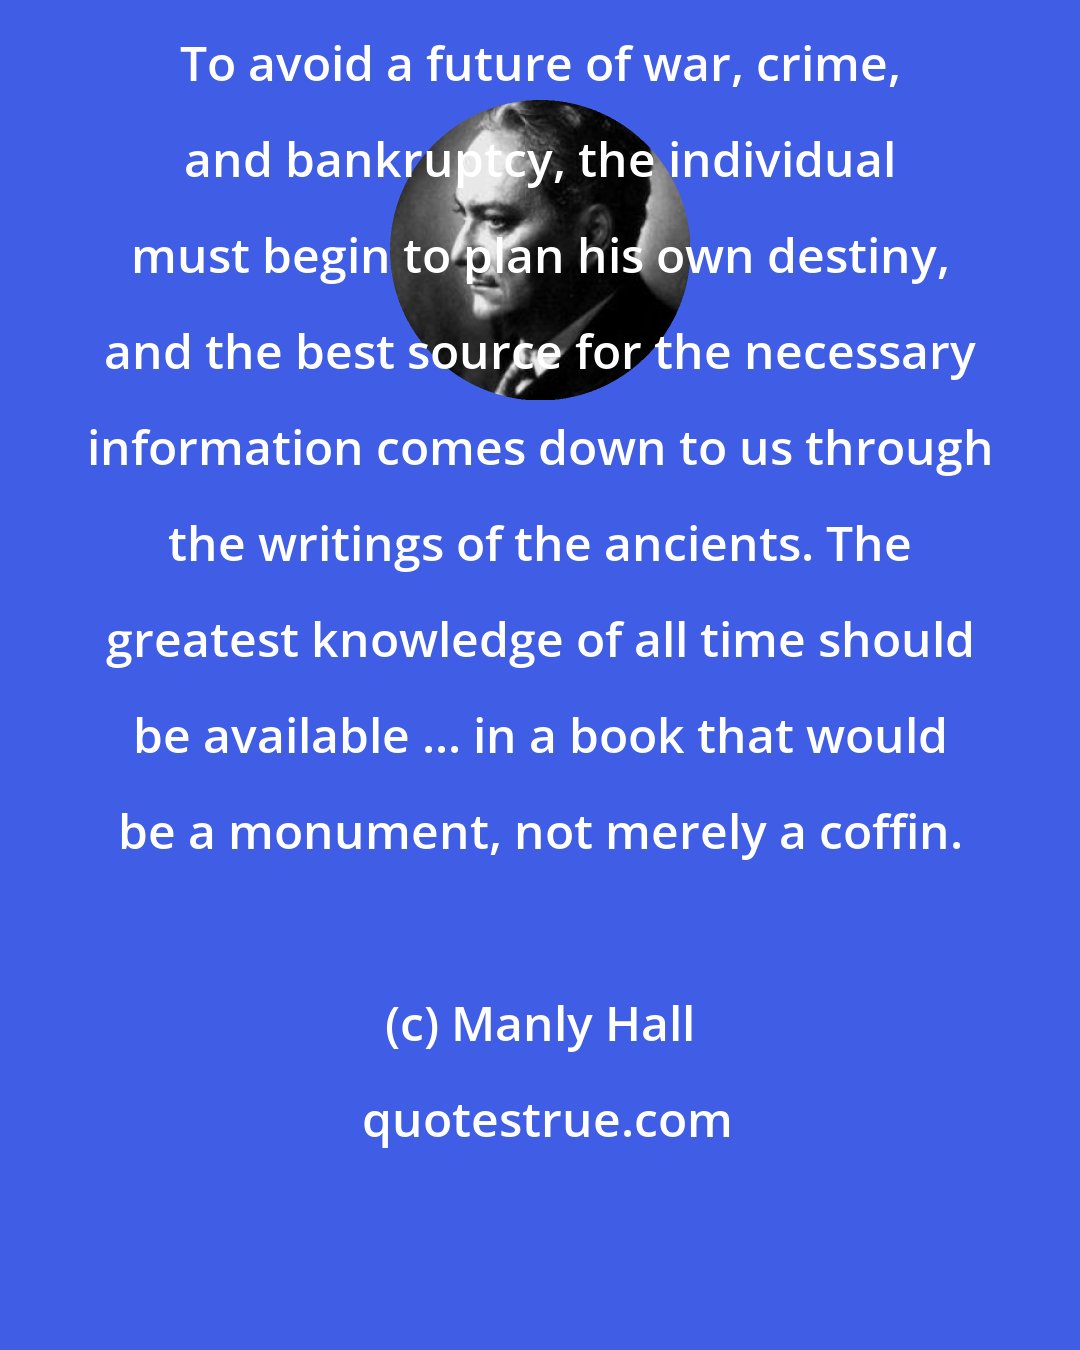 Manly Hall: To avoid a future of war, crime, and bankruptcy, the individual must begin to plan his own destiny, and the best source for the necessary information comes down to us through the writings of the ancients. The greatest knowledge of all time should be available ... in a book that would be a monument, not merely a coffin.